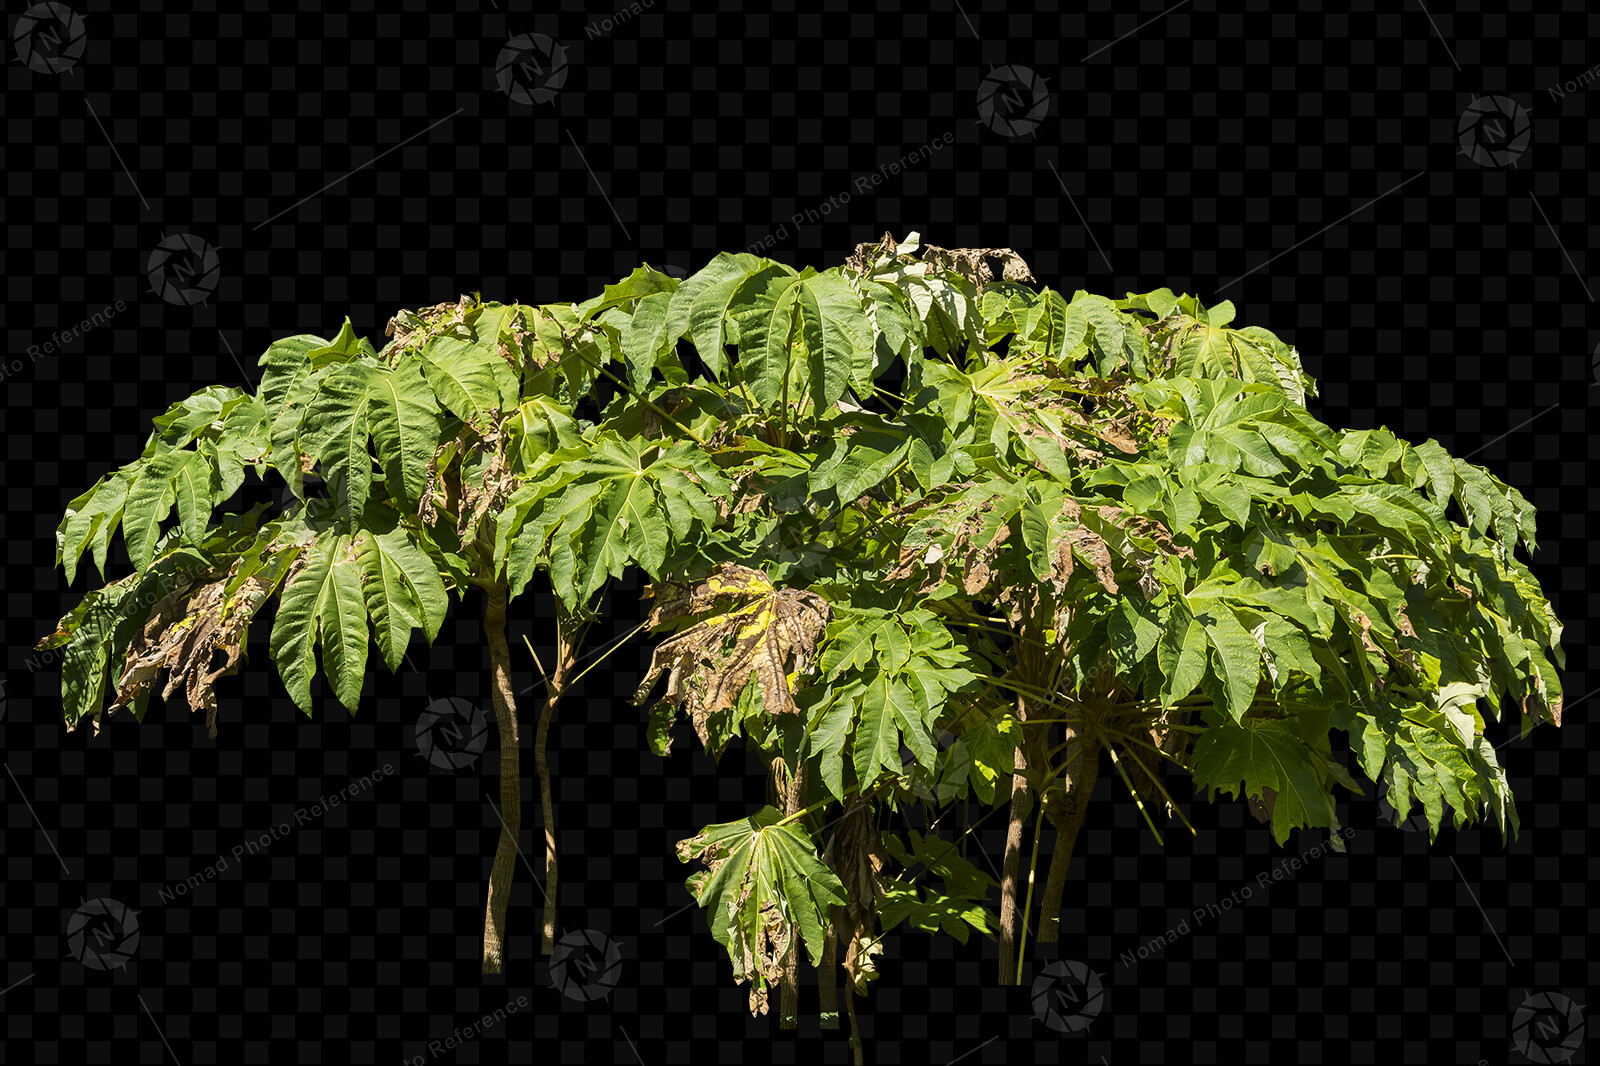 From the PNG Photo Pack: Exotic Trees volume 2

https://www.artstation.com/a/4717987